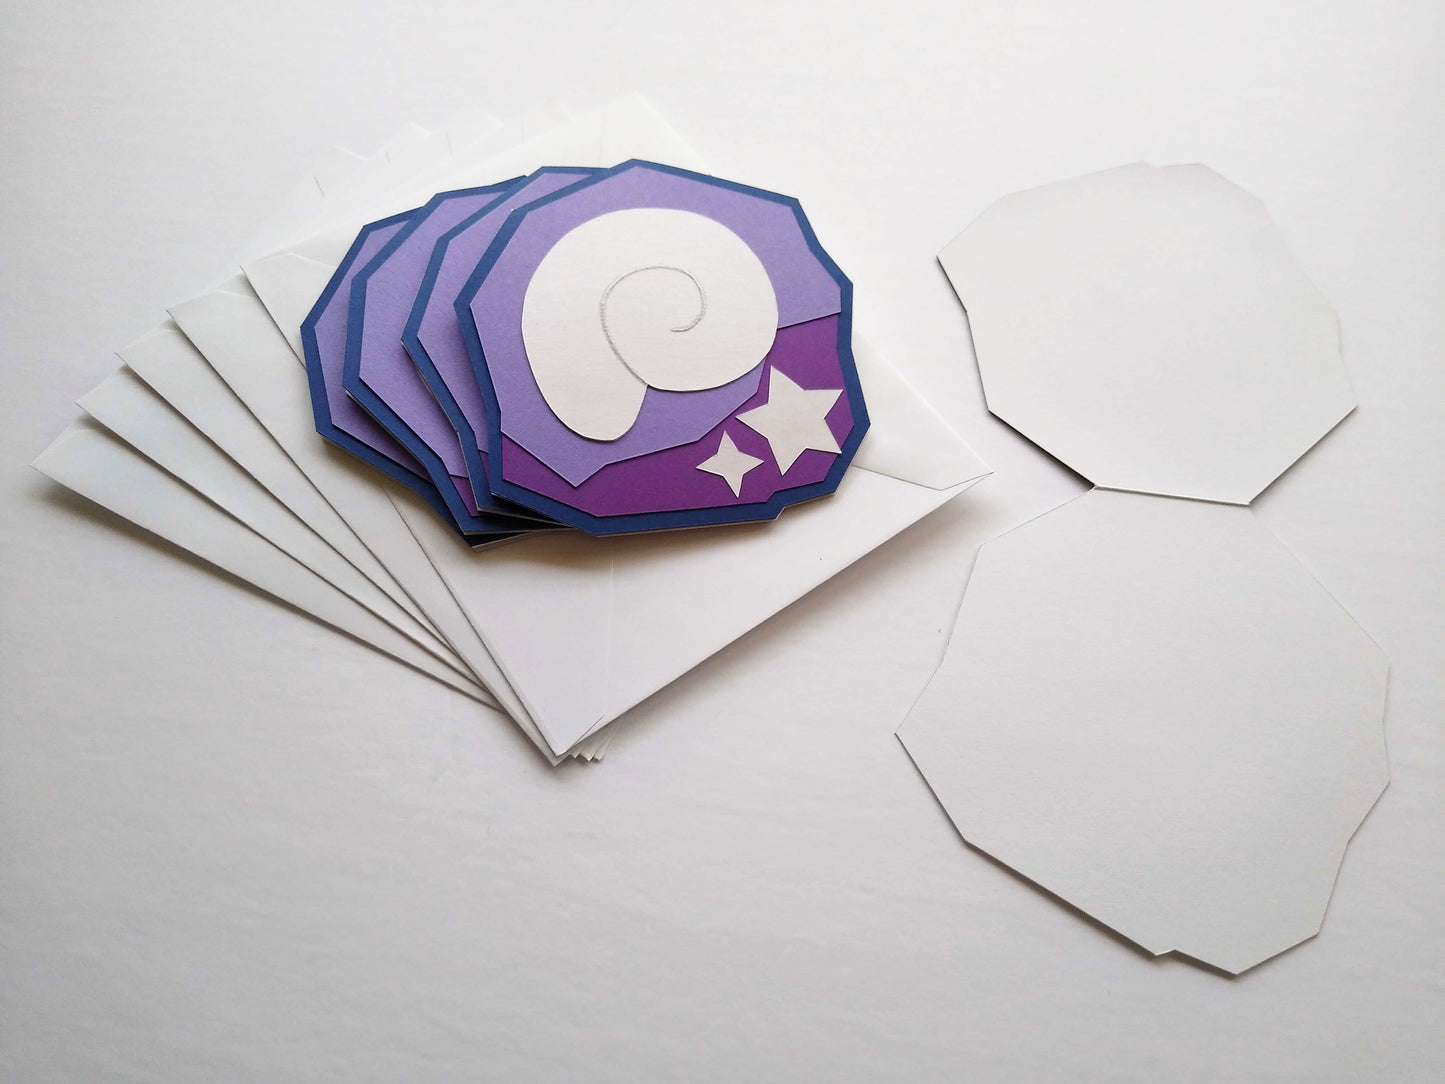 Four purple and white cards are stacked, splayed, on top of five white envelopes. The cards are designed to look like a shell and stars stuck inside a purple rock, like fossils. One card is opened up flat on the table beside them.